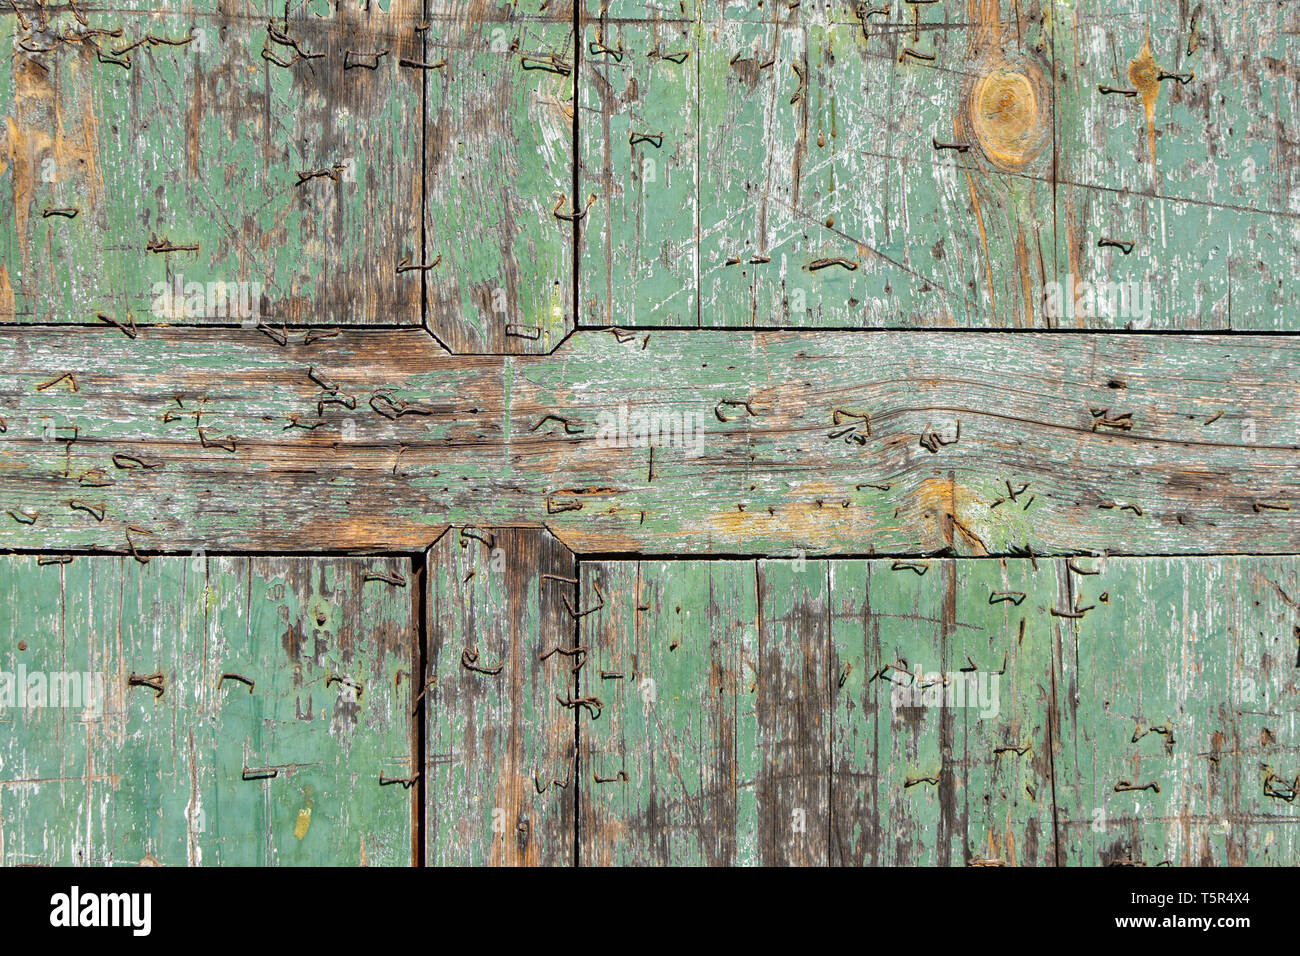 Old chipped wooden teal blue plank with staples texture background Stock Photo